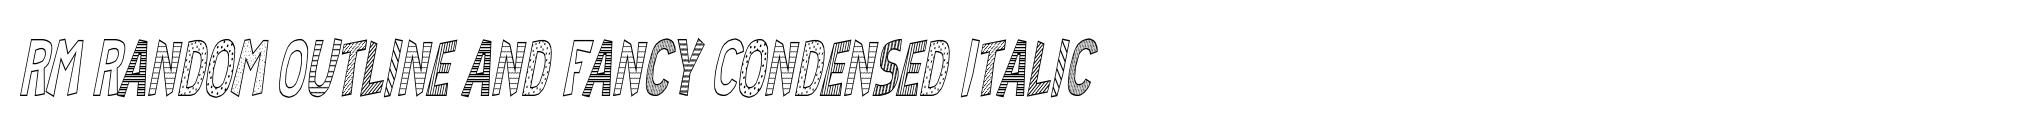 RM Random Outline and Fancy Condensed Italic image